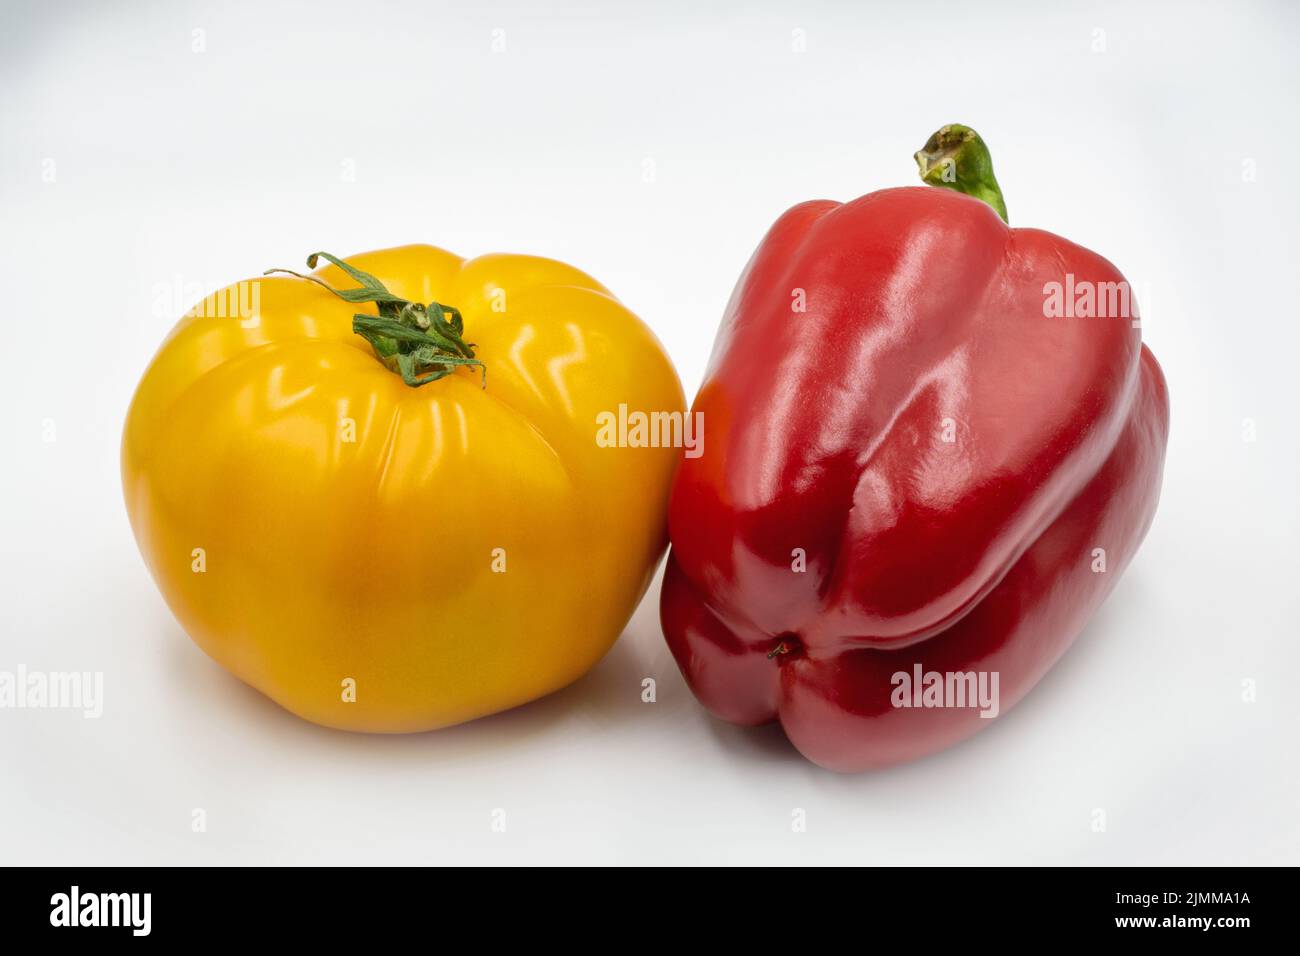 Whole yellow tomato and red bell pepper closeup against white Stock Photo